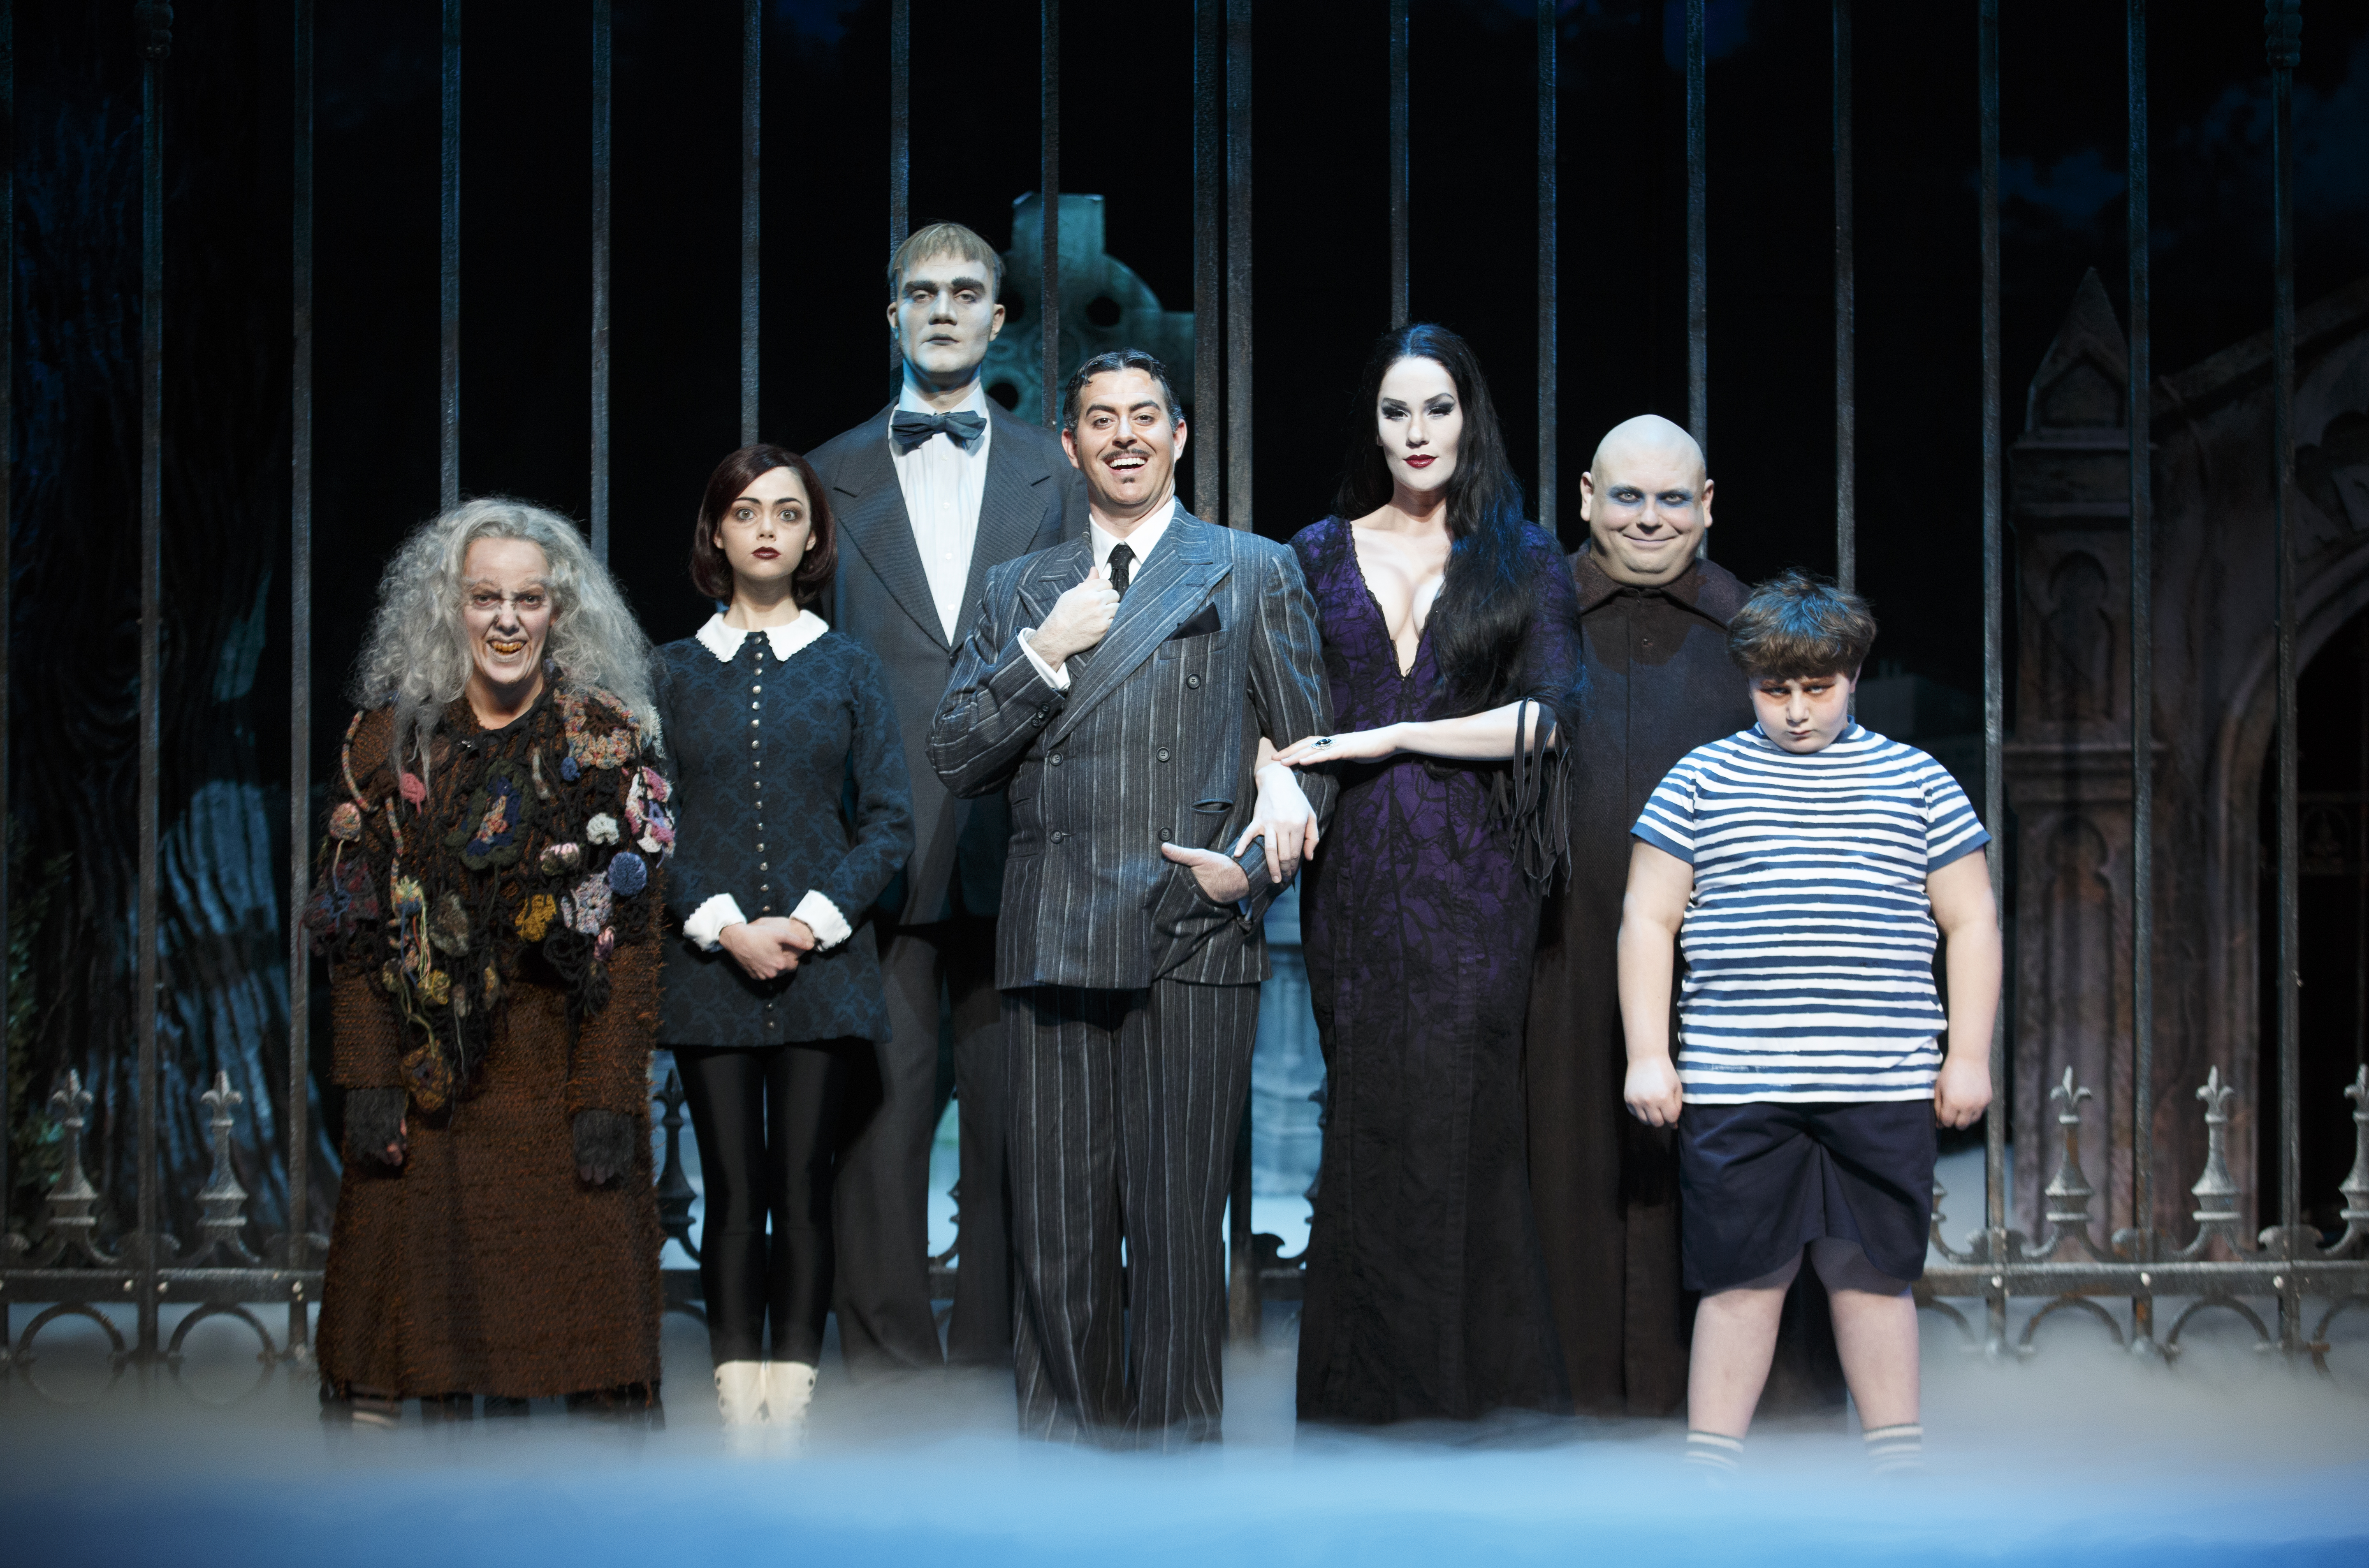 Theater League’s “The Addams Family” – Fearsome Fun